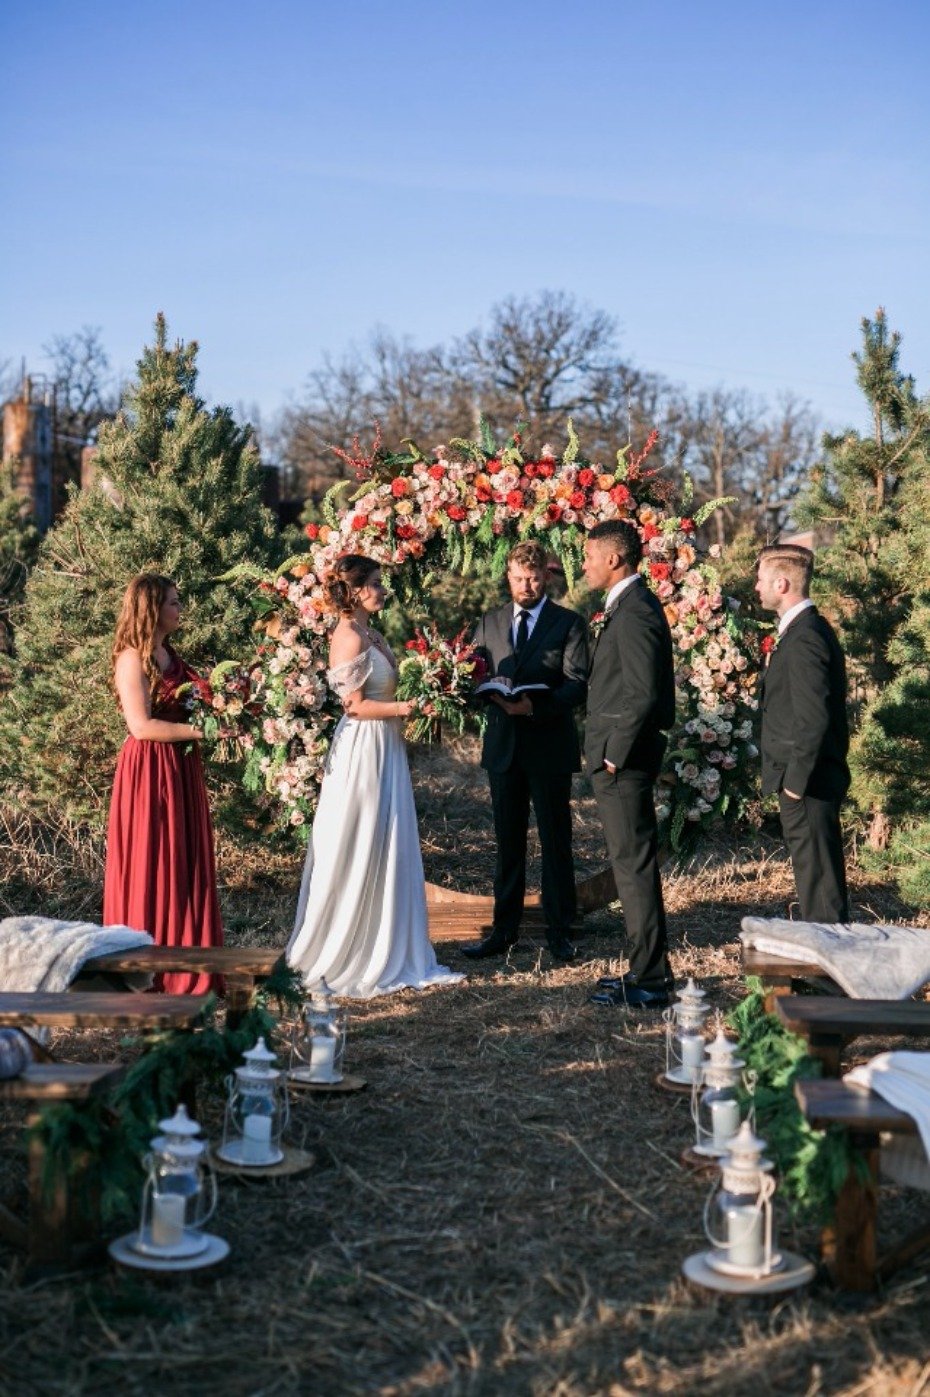 summer weddings are nice but this winter wedding is full of spice